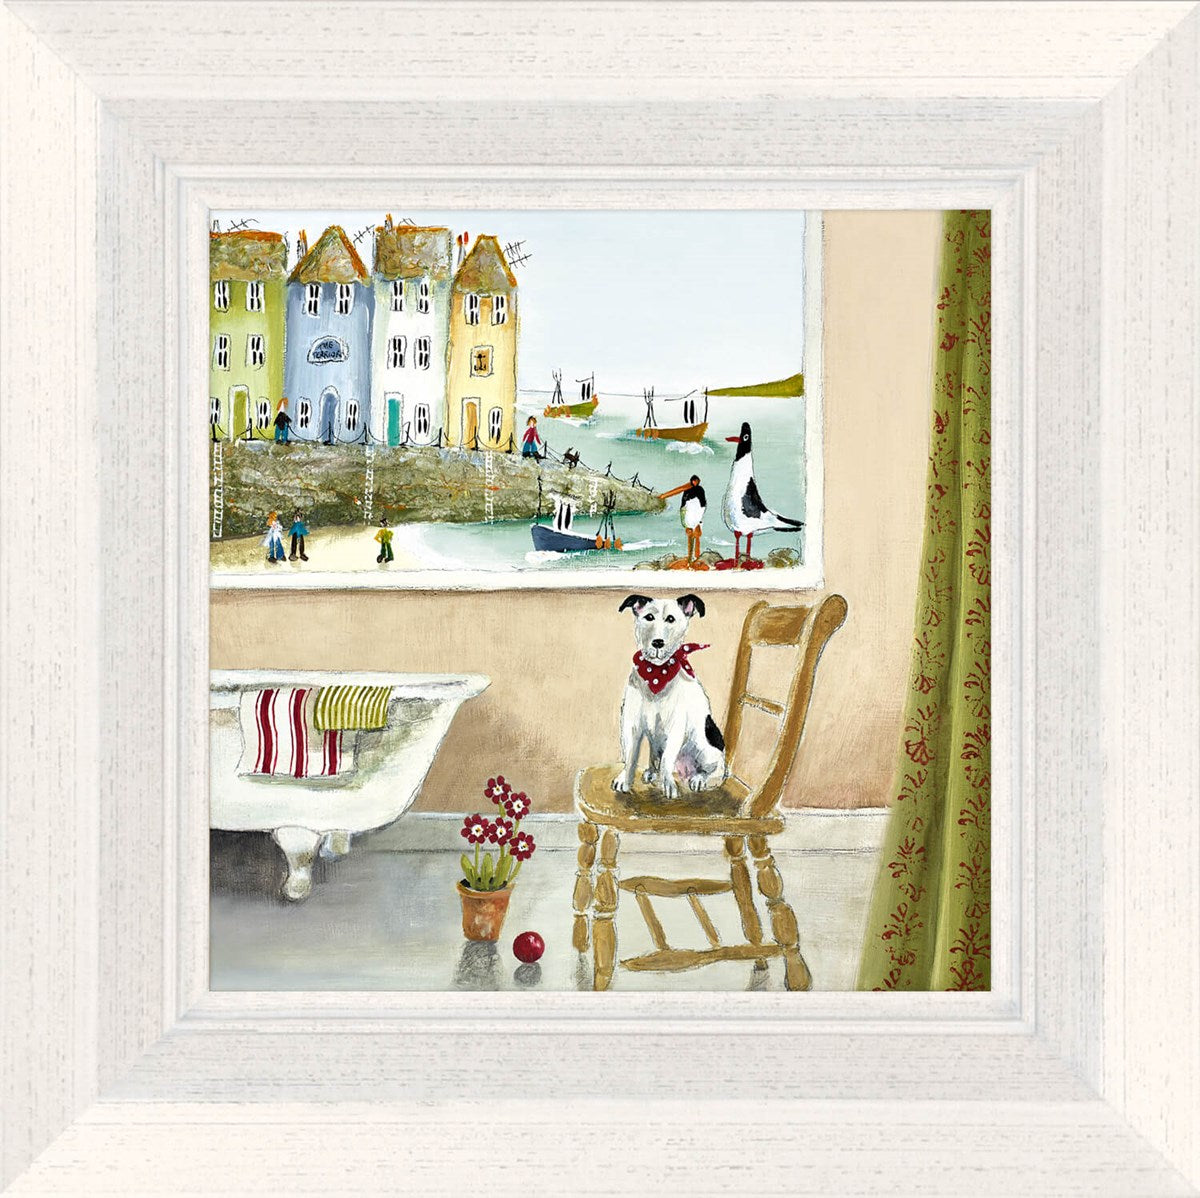 Paws and Reflect limited edition framed print by Rebecca Lardner